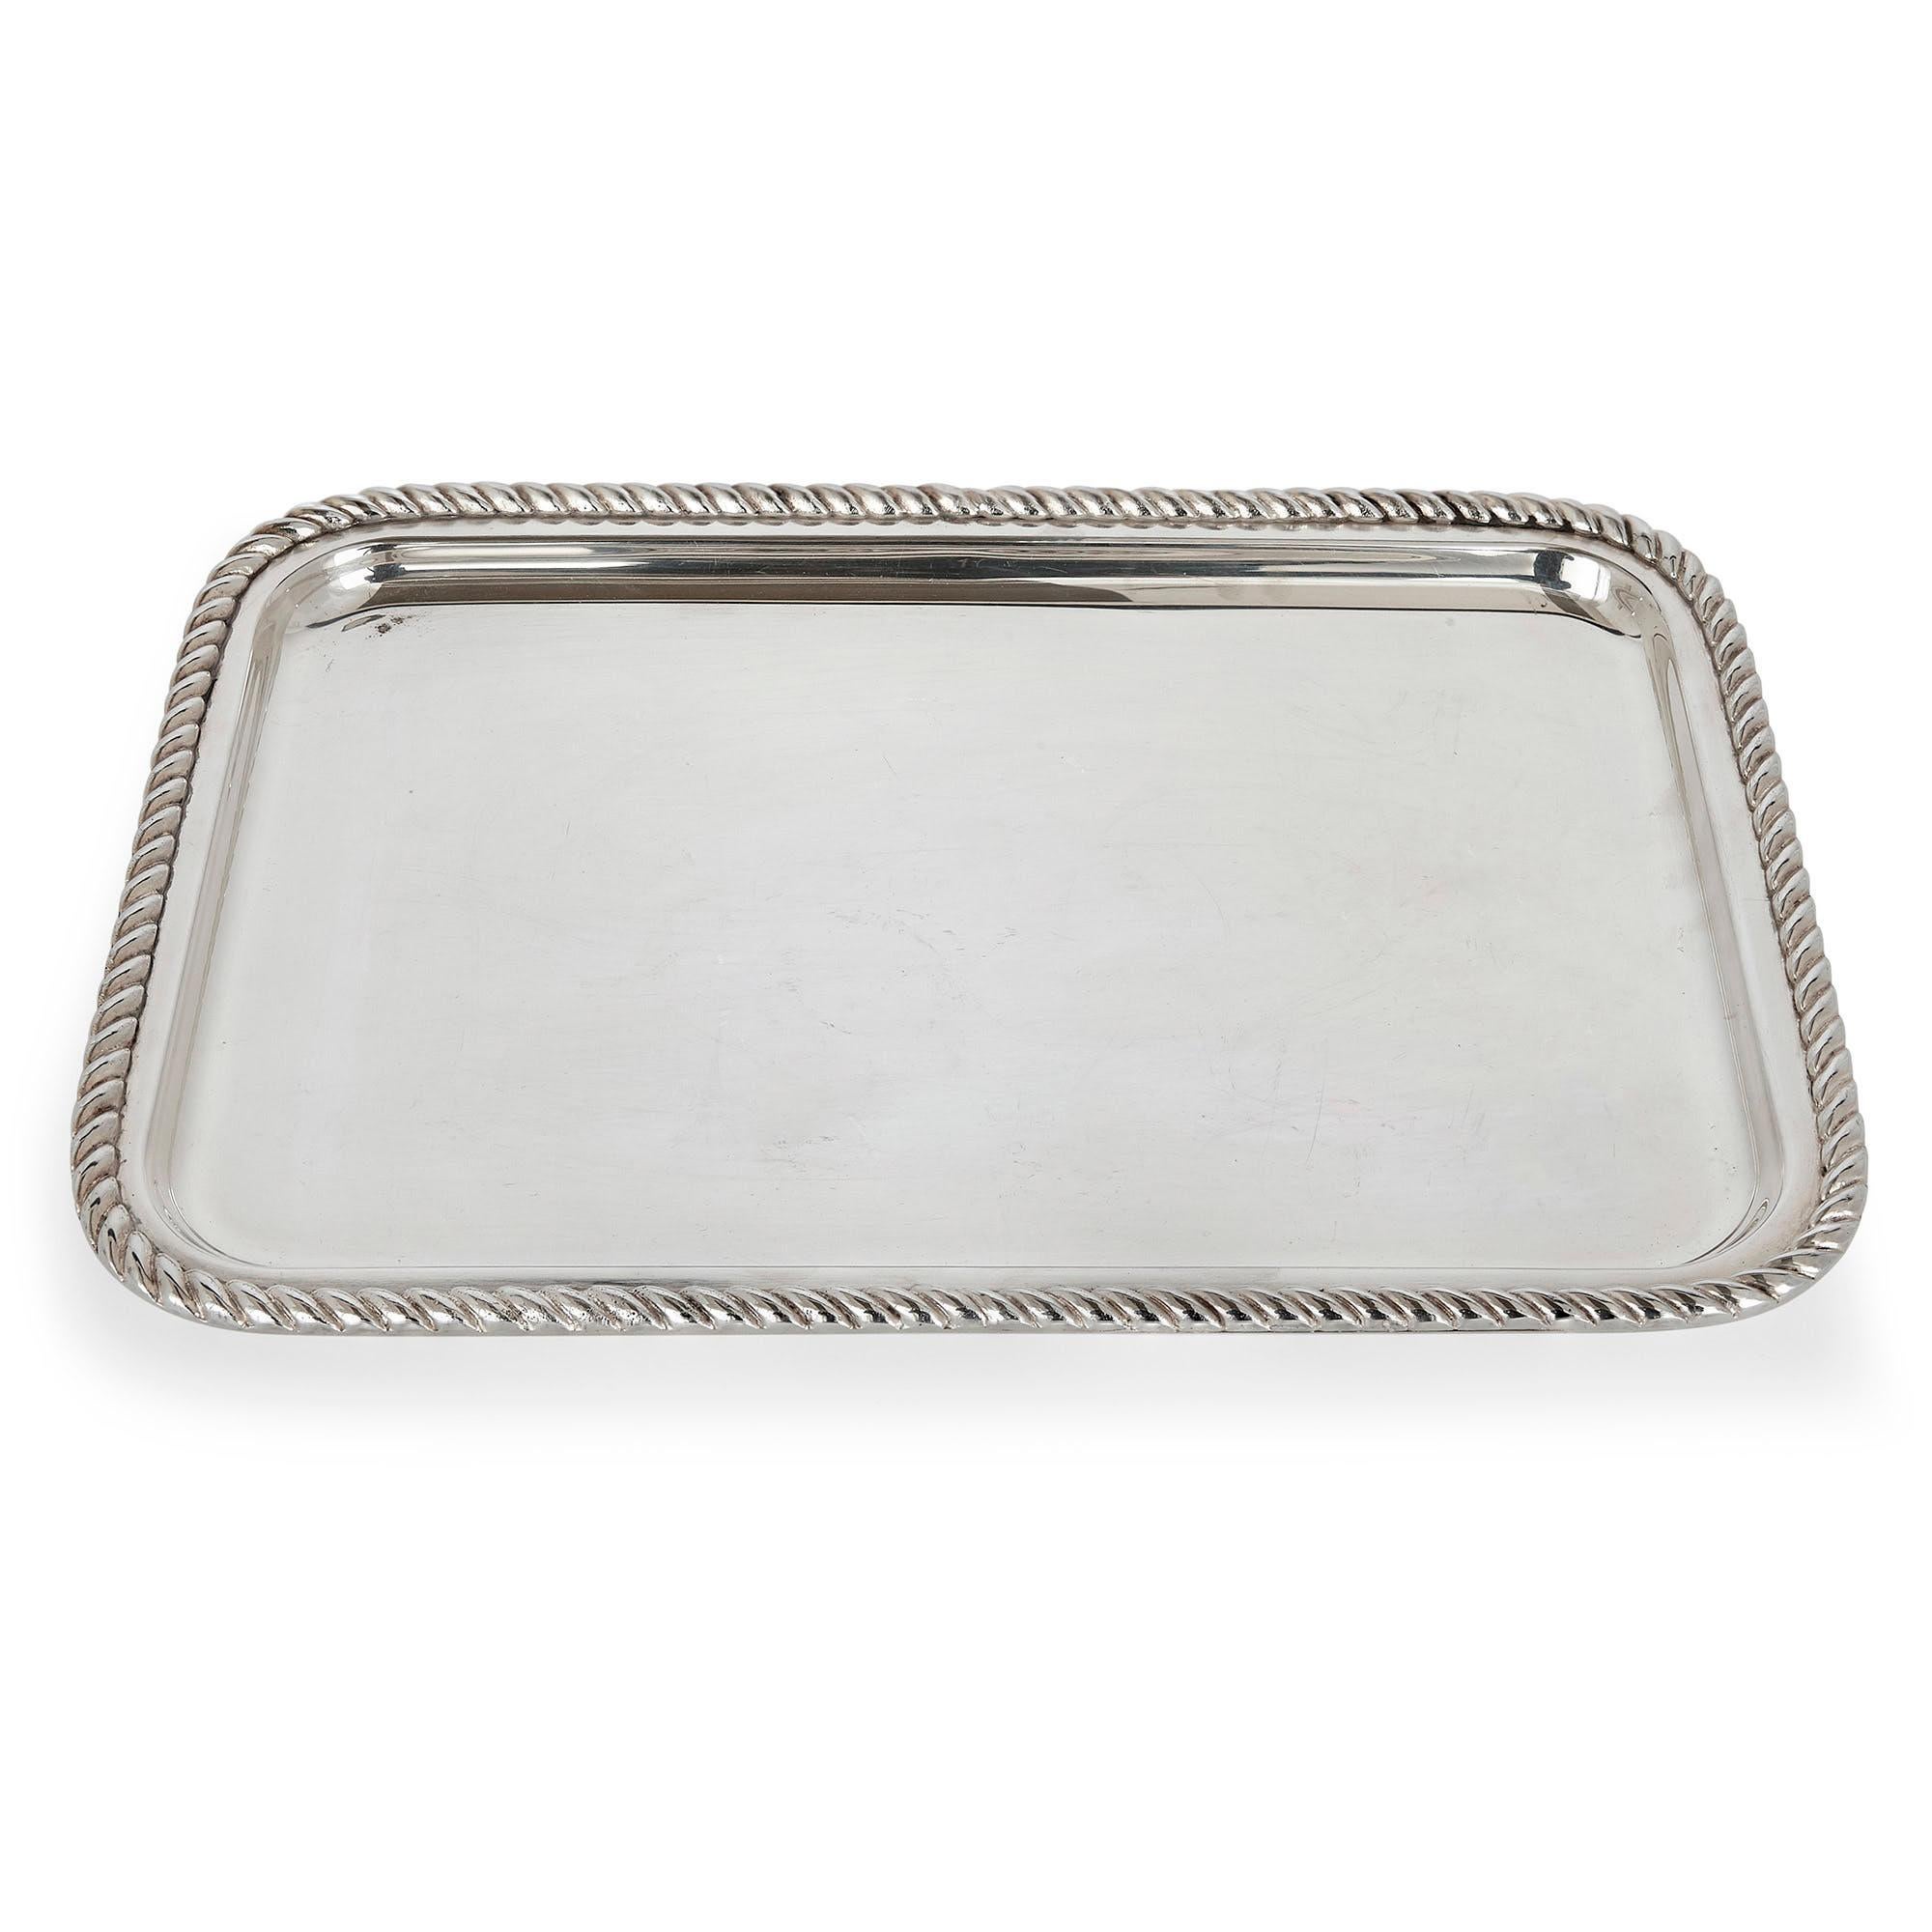 Fine silver-plate tray by Lebanese Firm Habis
Lebanese, 20th century
Dimensions: Height 21cm, diameter 20cm

Featuring an elegant rectangular shape body, this fine tray is crafted from silver-plate by Lebanese firm Habis. The tray features